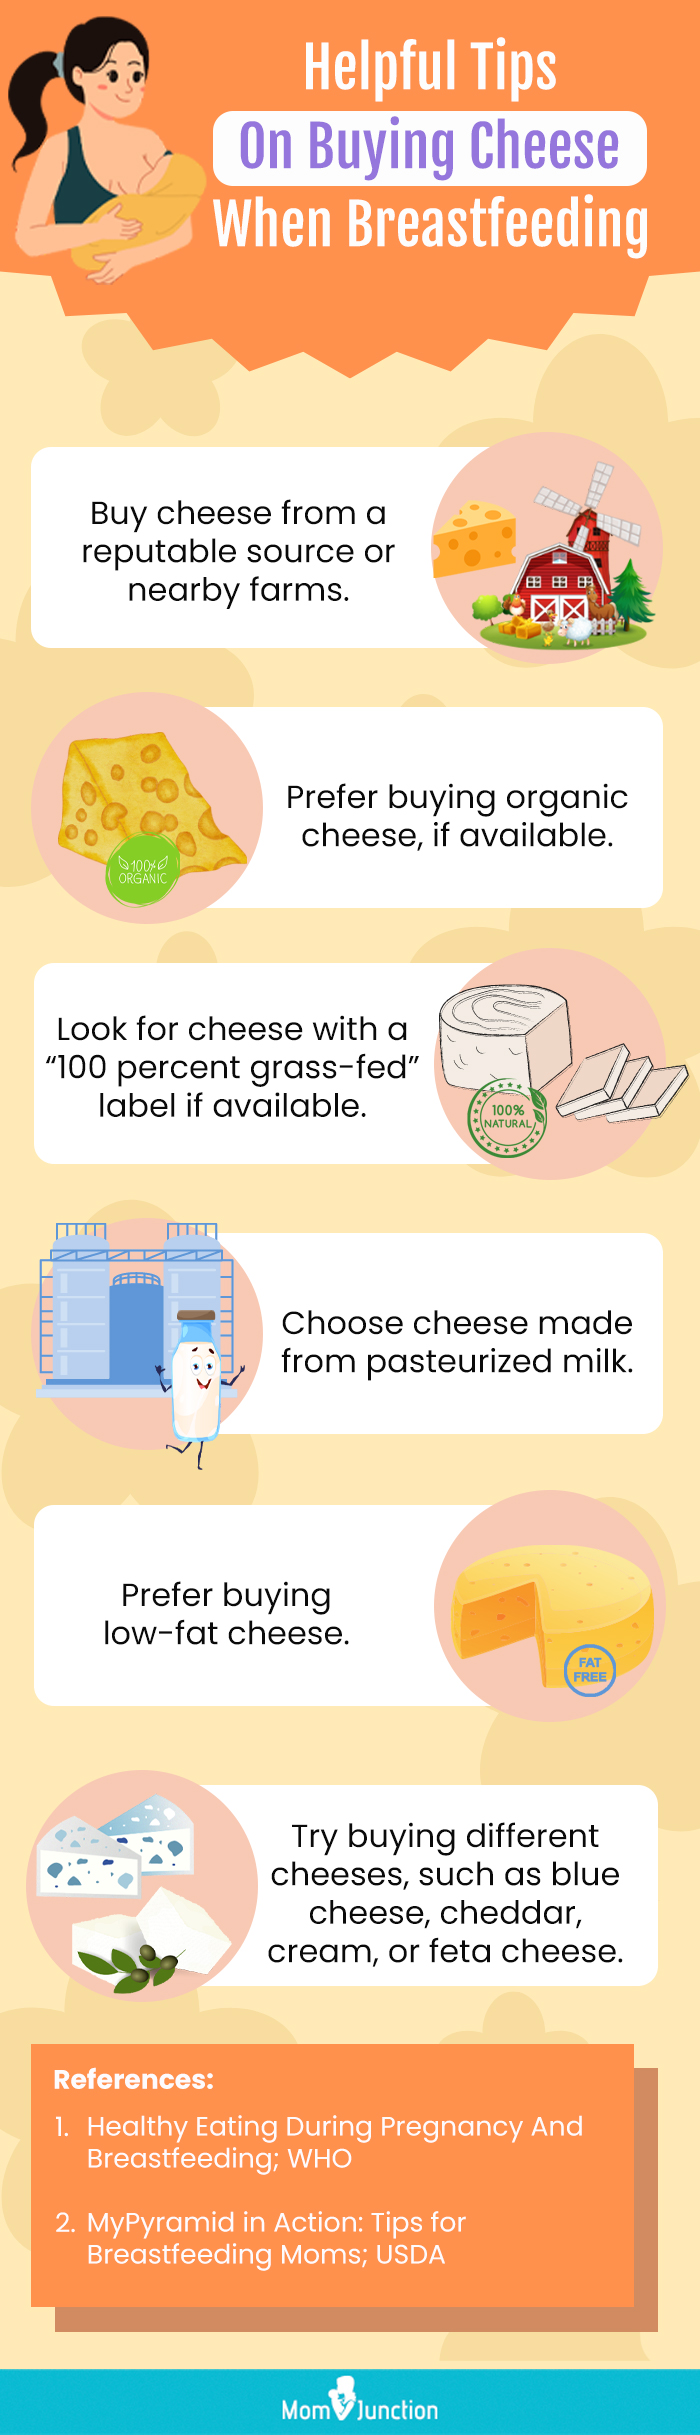 https://www.momjunction.com/wp-content/uploads/2015/07/Infographic-Things-To-Consider-When-Buying-Cheese-When-Nursing-Moms.jpg